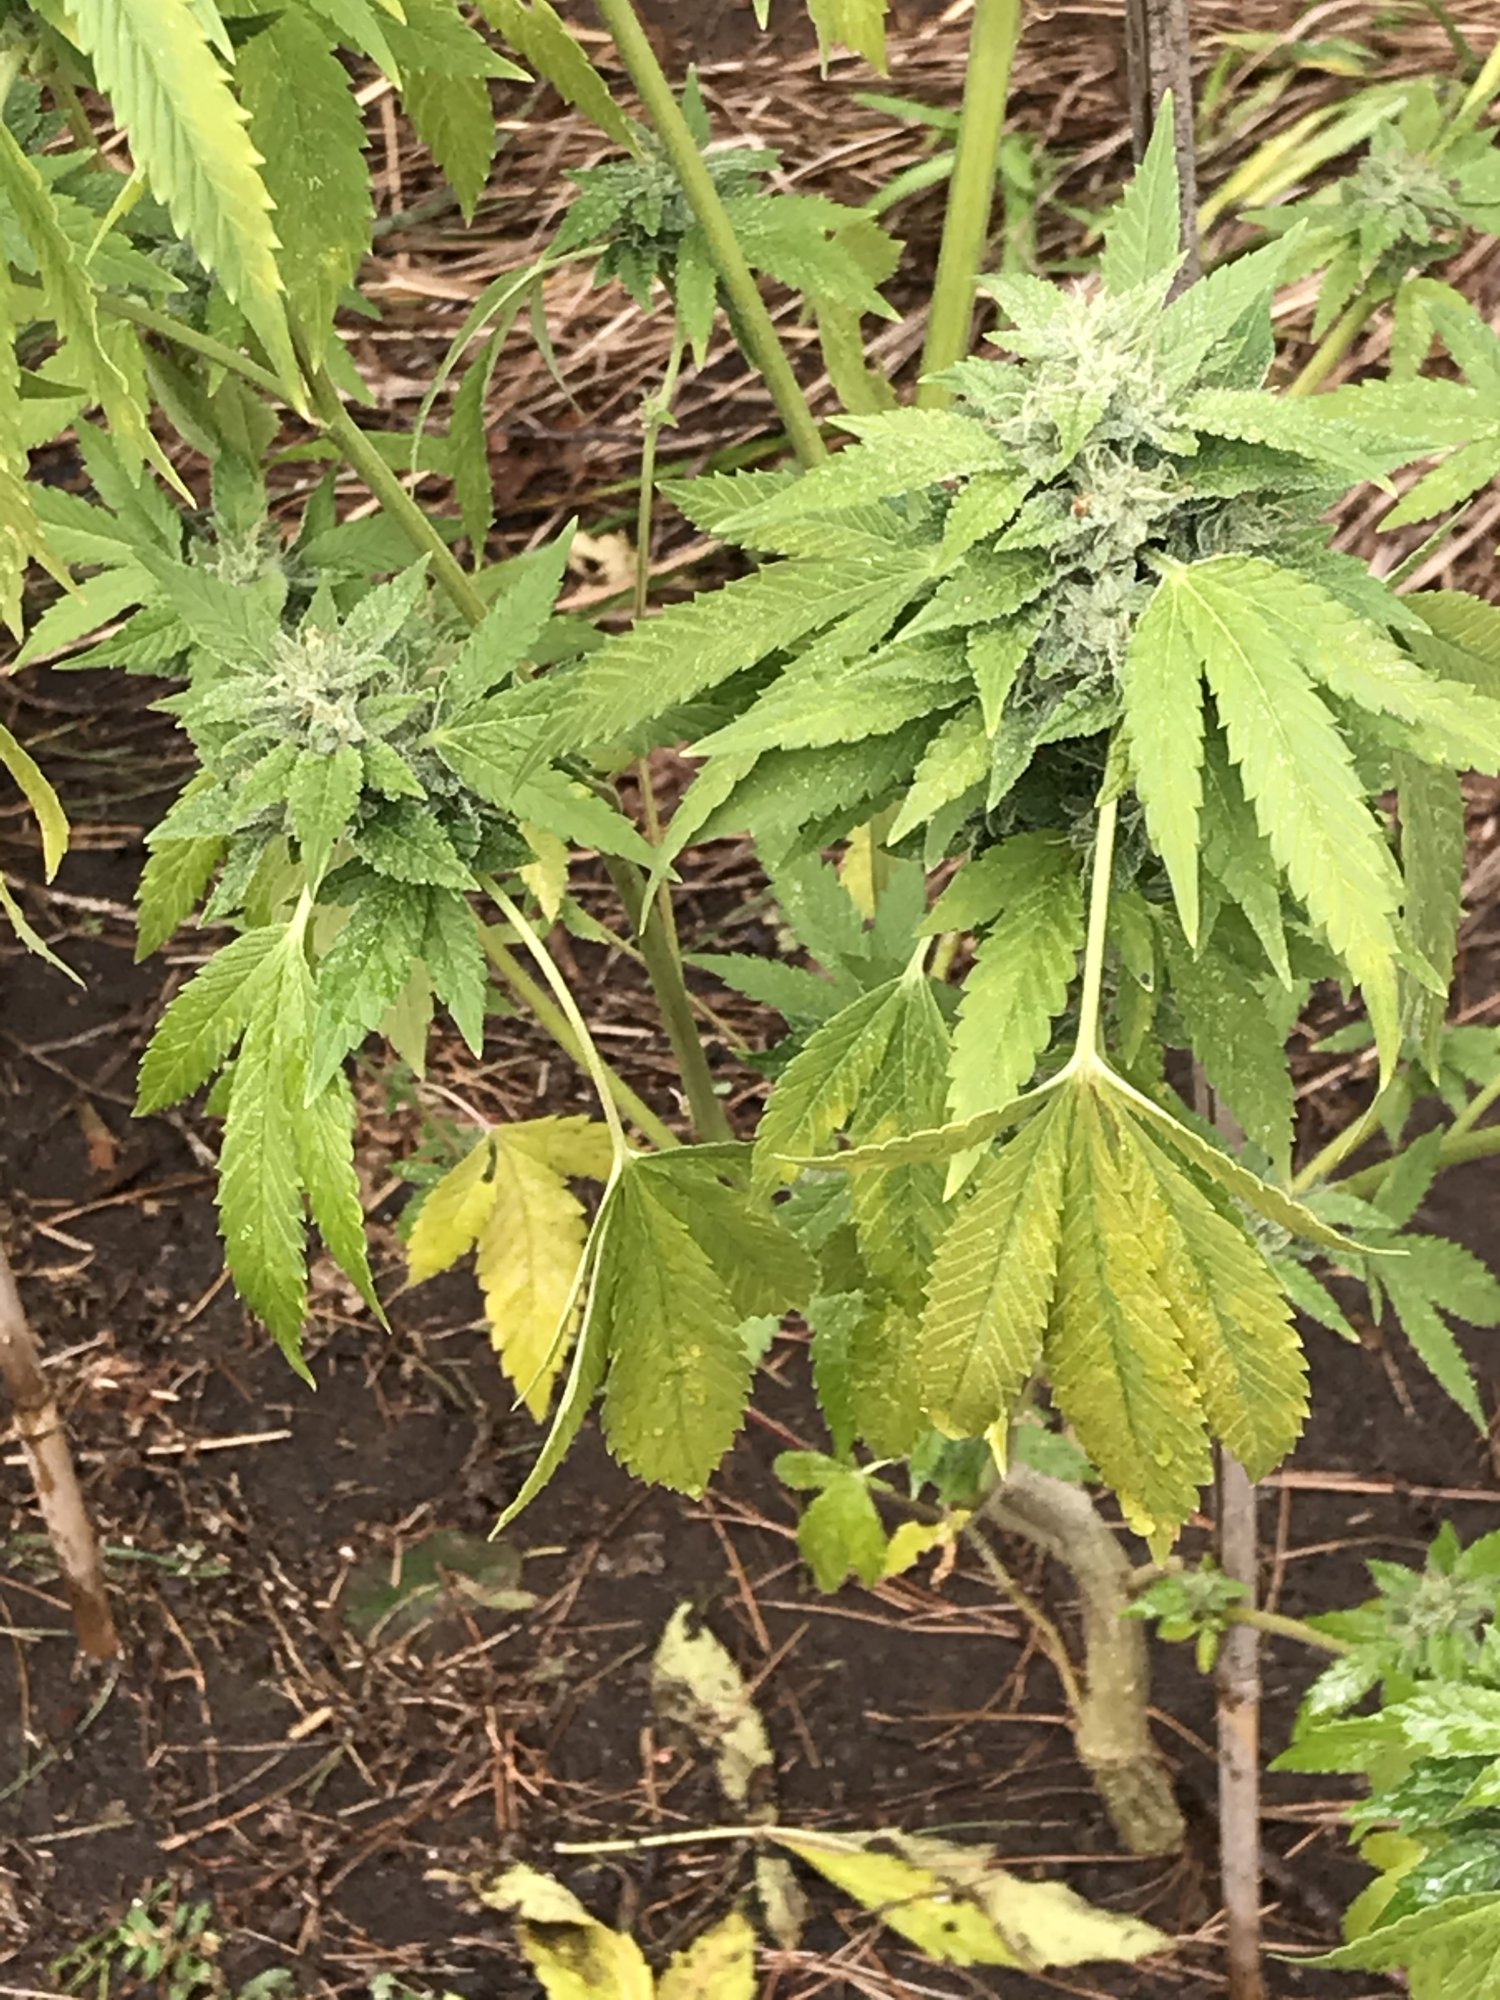 First timer needs help with outdoor grow